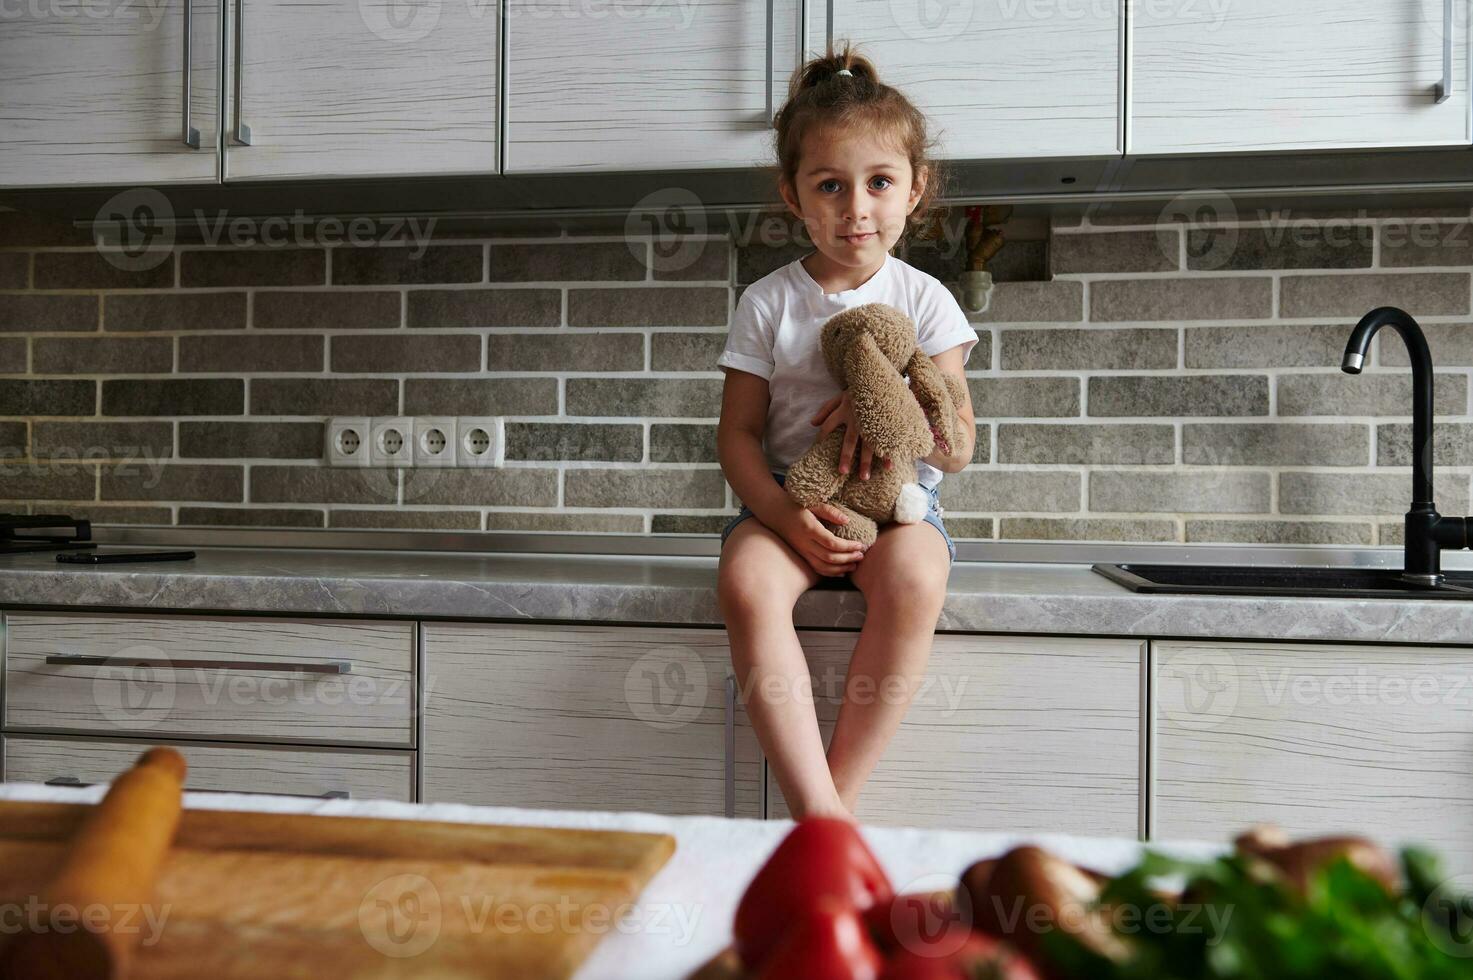 A charming little girl is sitting on a kitchen countertop with a soft plush toy in her hands. Vegetables on the table in the foreground photo